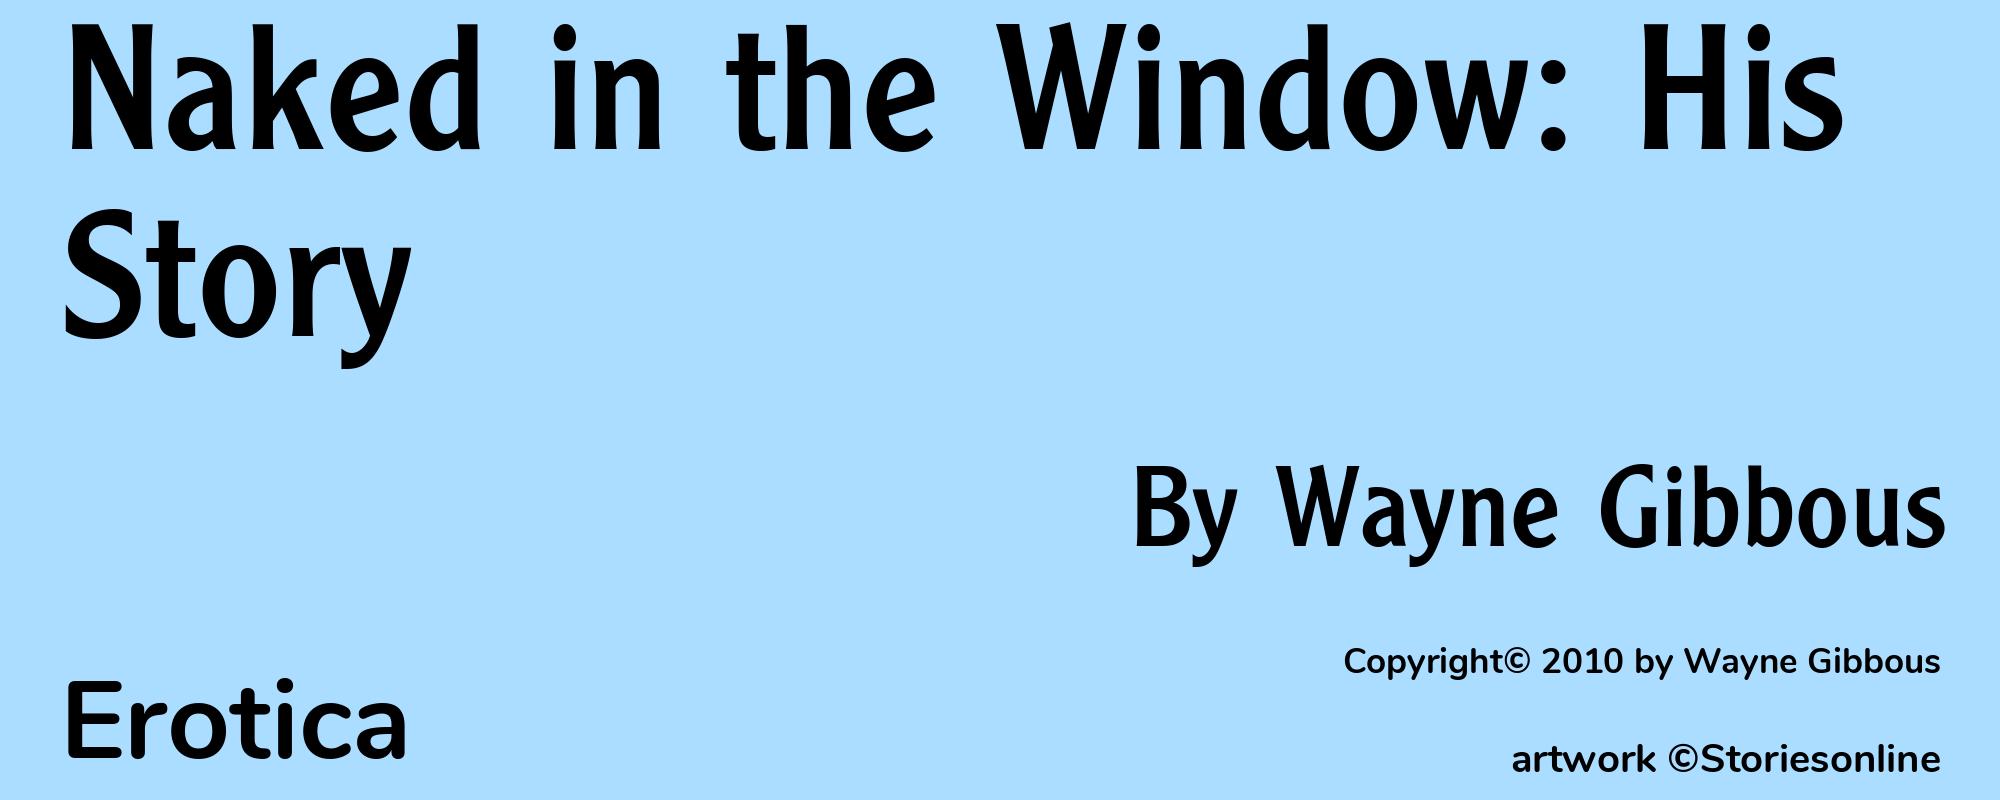 Naked in the Window: His Story - Cover